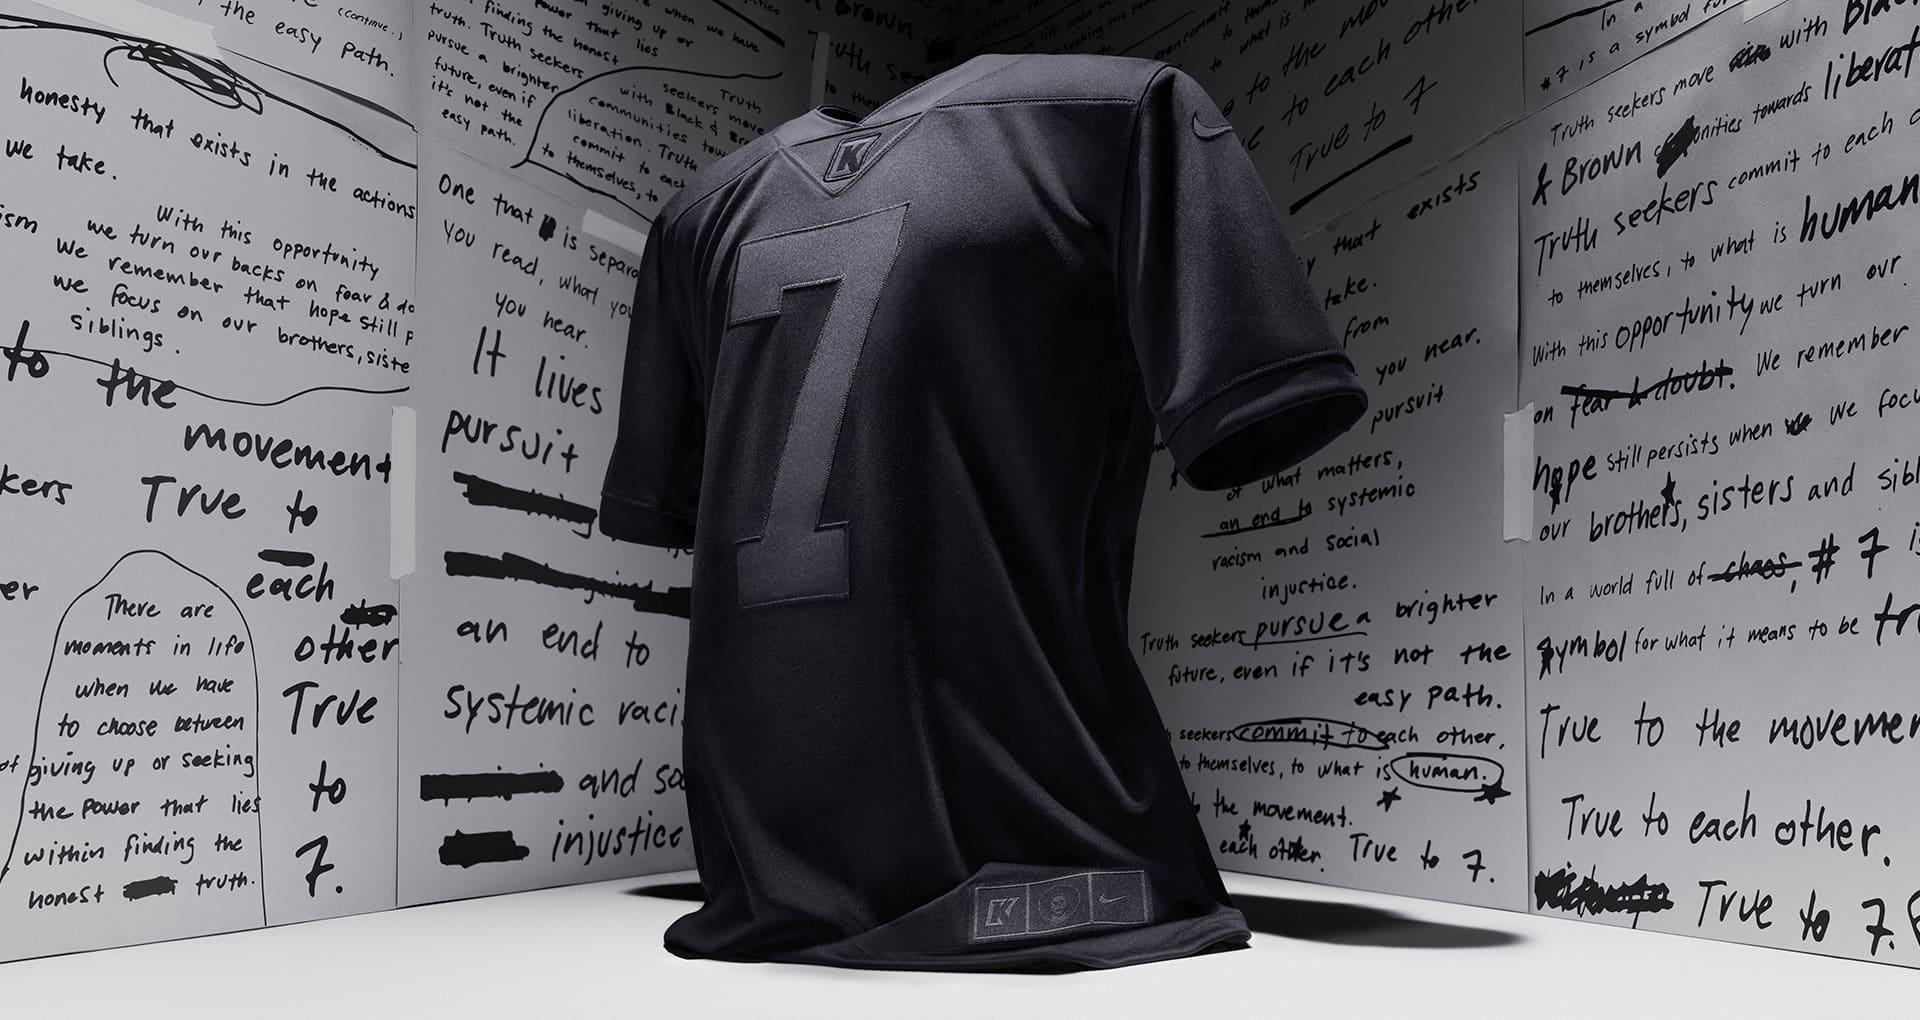 Nike's new Colin Kaepernick jersey commemorating four years since he took a  knee sells out in less than a minute - CBS News